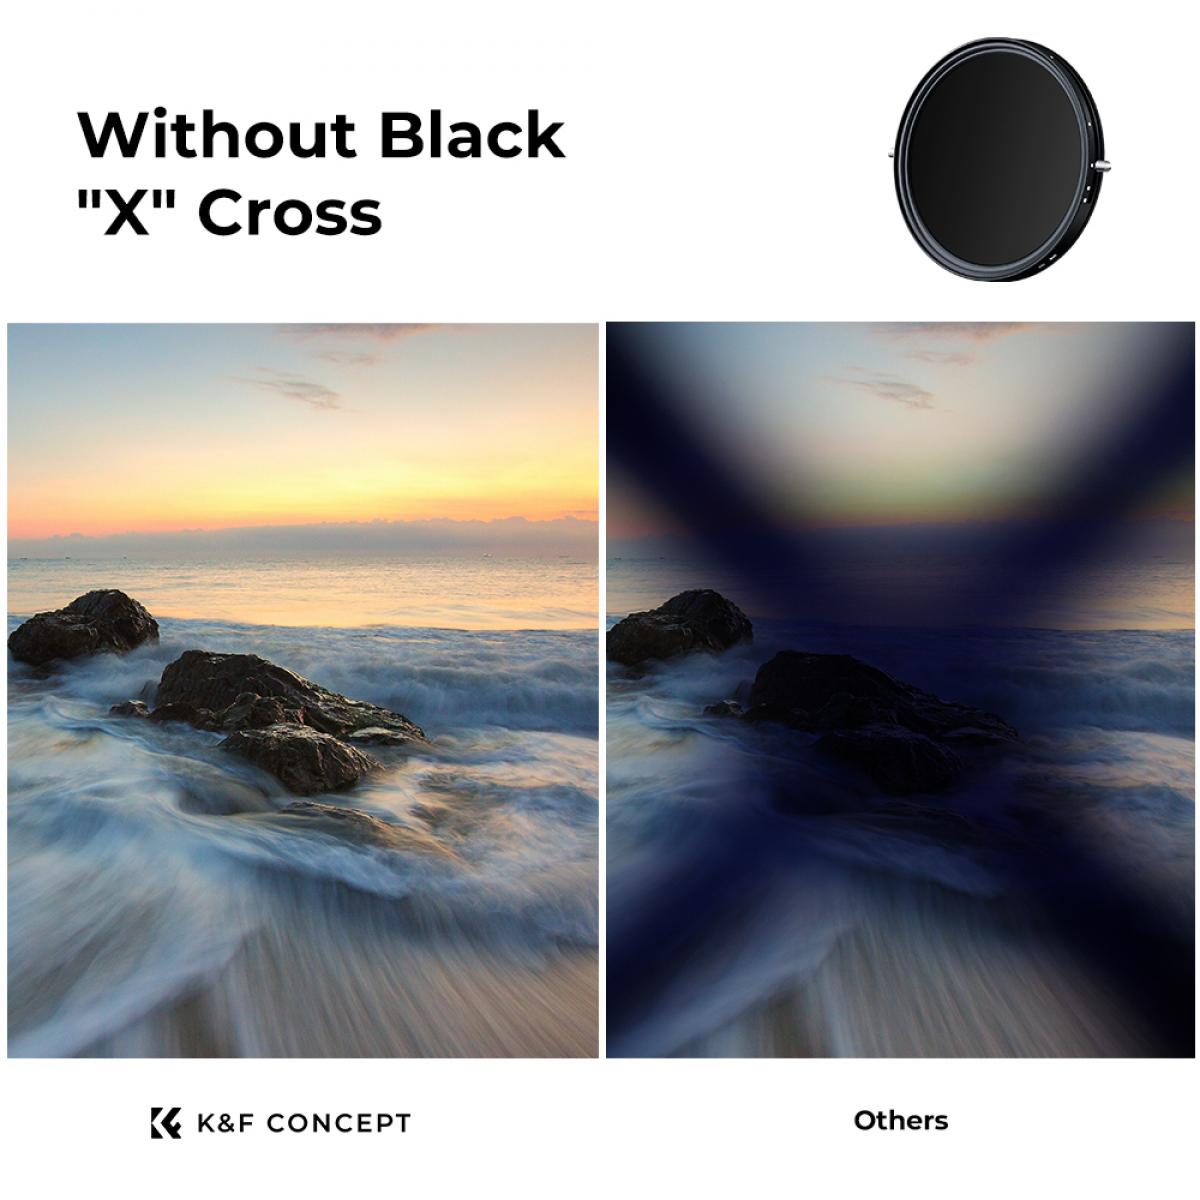 1-5 Stop Ultra-Thin Frame Design Multilayer Coating for Camera Lens No Black Cross Neewer 72mm Variable Fader ND Filter Neutral Density Variable Filter ND2 to ND32 